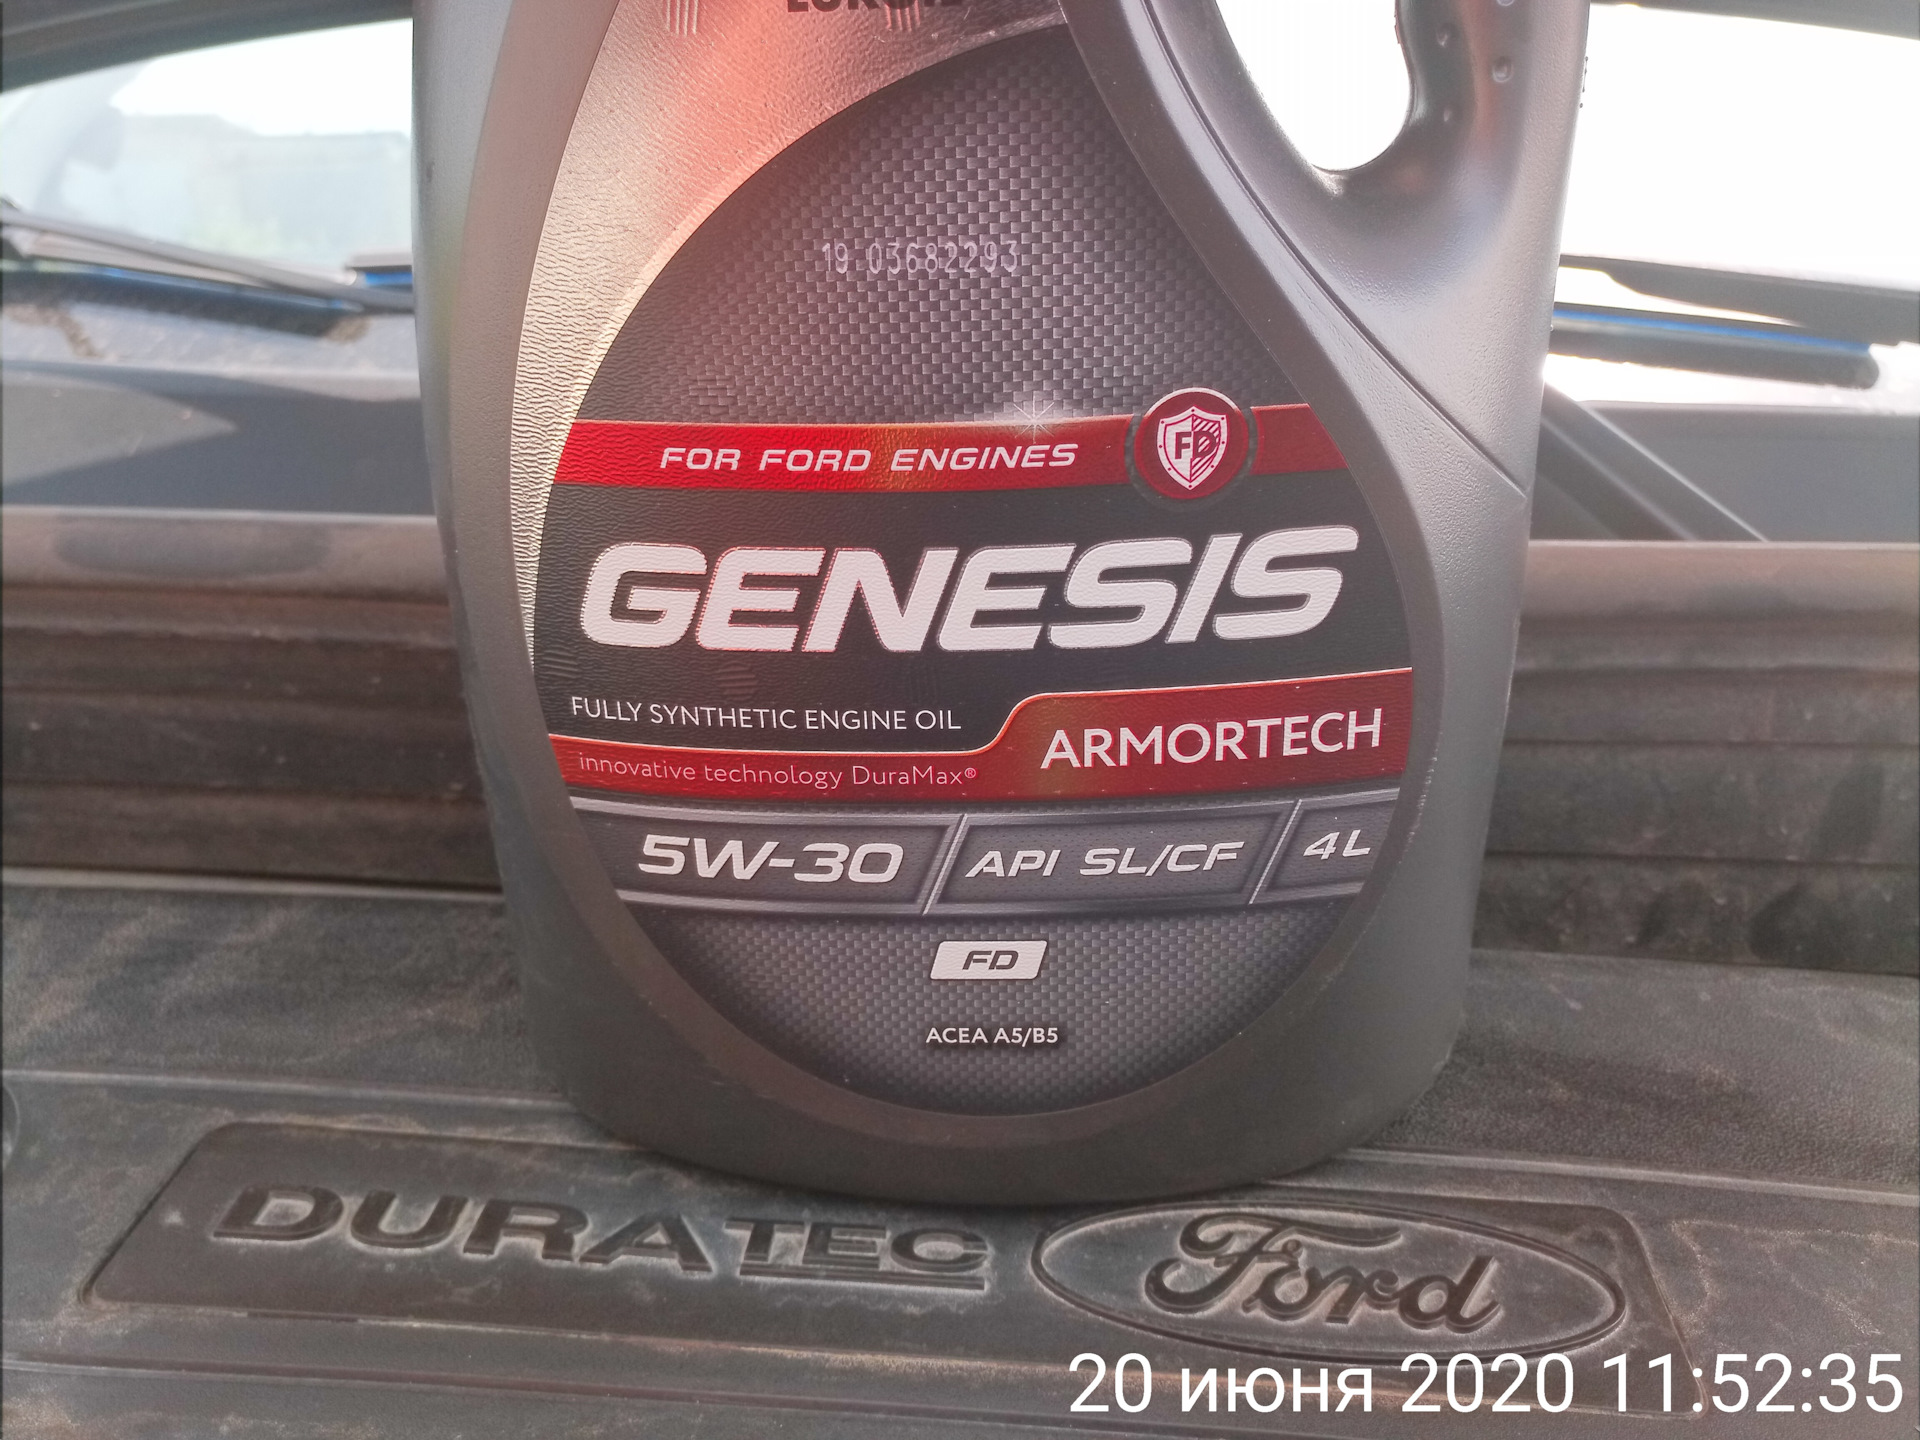 Моторное масло лукойл форд. Genesis Armortech FD 5w-30. Масло Lukoil Genesis 5w30 Ford. Масло Лукойл Генезис 5w30 Форд. Lukoil Genesis Armortech FD 5w-30.